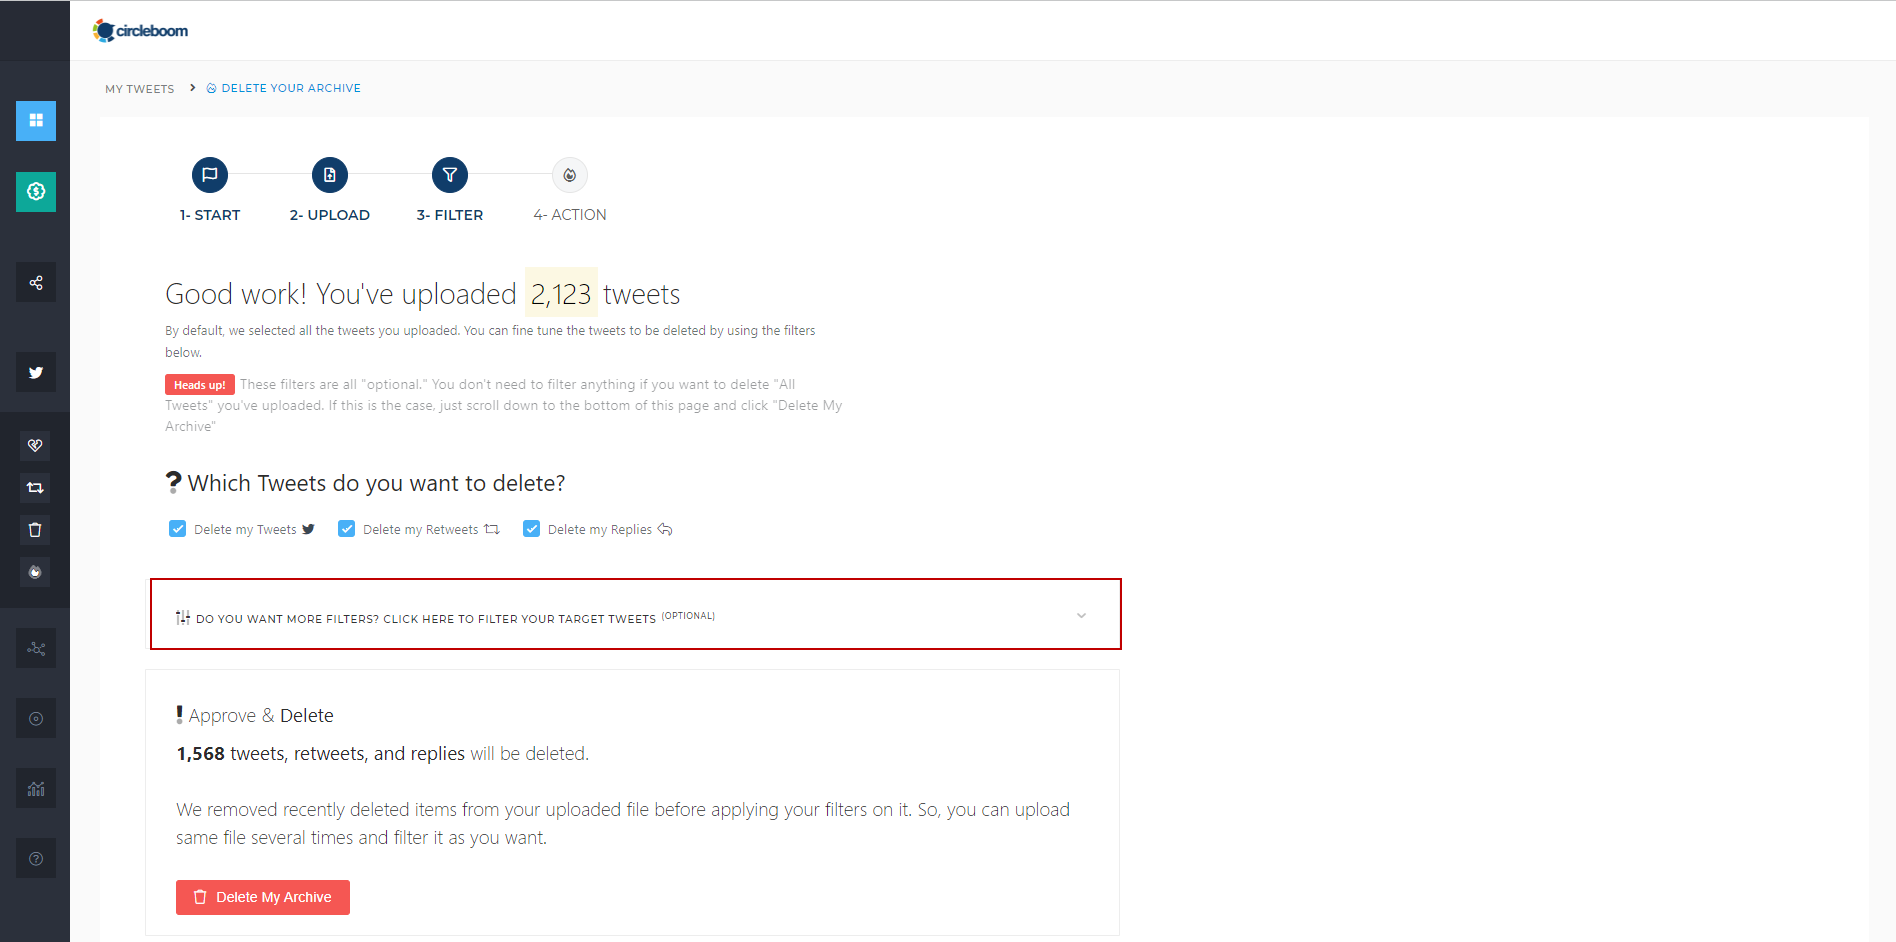 Get Circleboom’s Twitter Archive Deleter to clear your Twitter history in just a few steps!